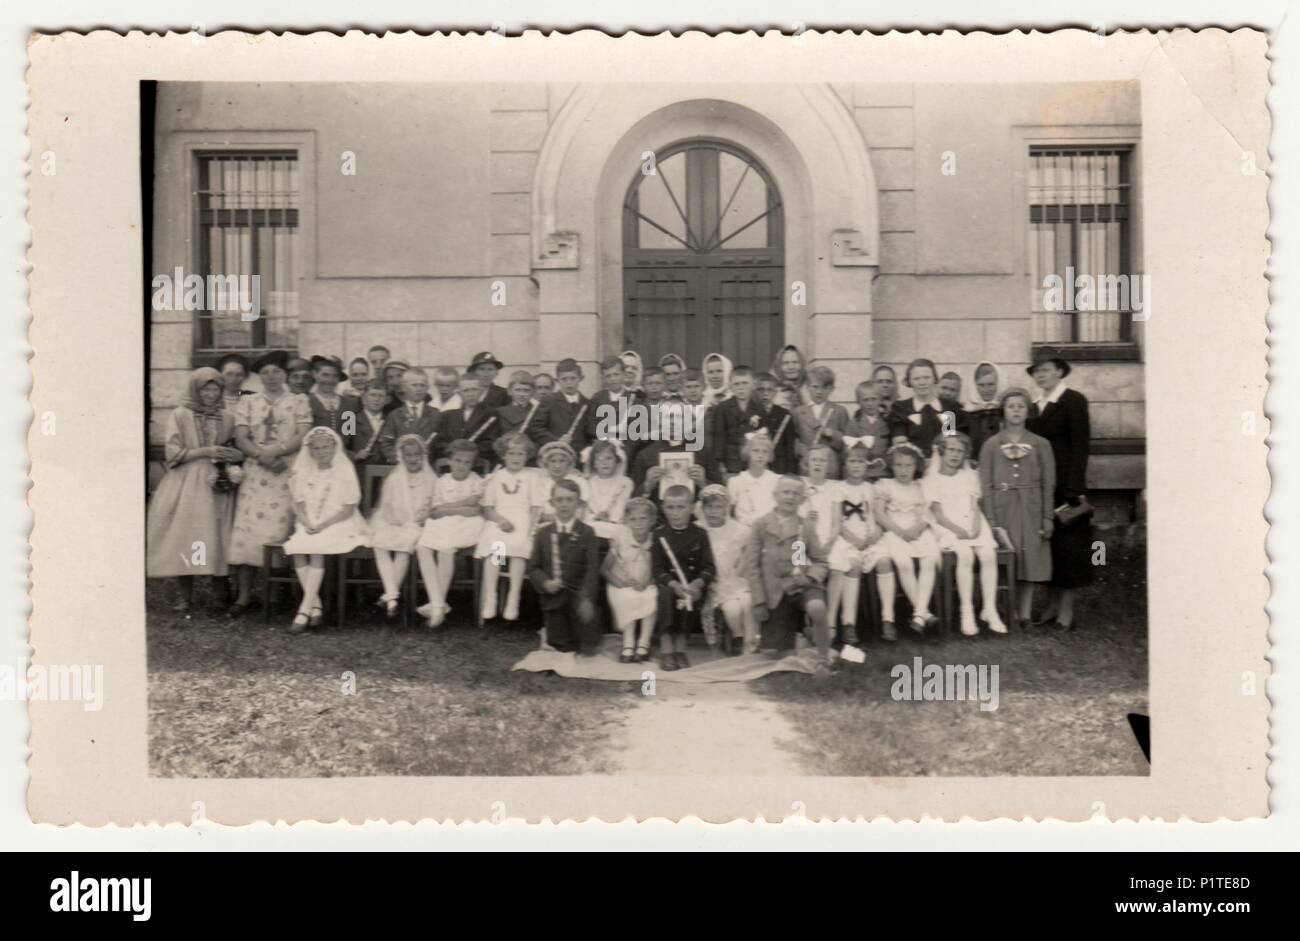 GERMANY - CIRCA 1930s: Vintage photo shows children and their relatives poses after a First Communion in front of the school. Retro black & white photography. Stock Photo